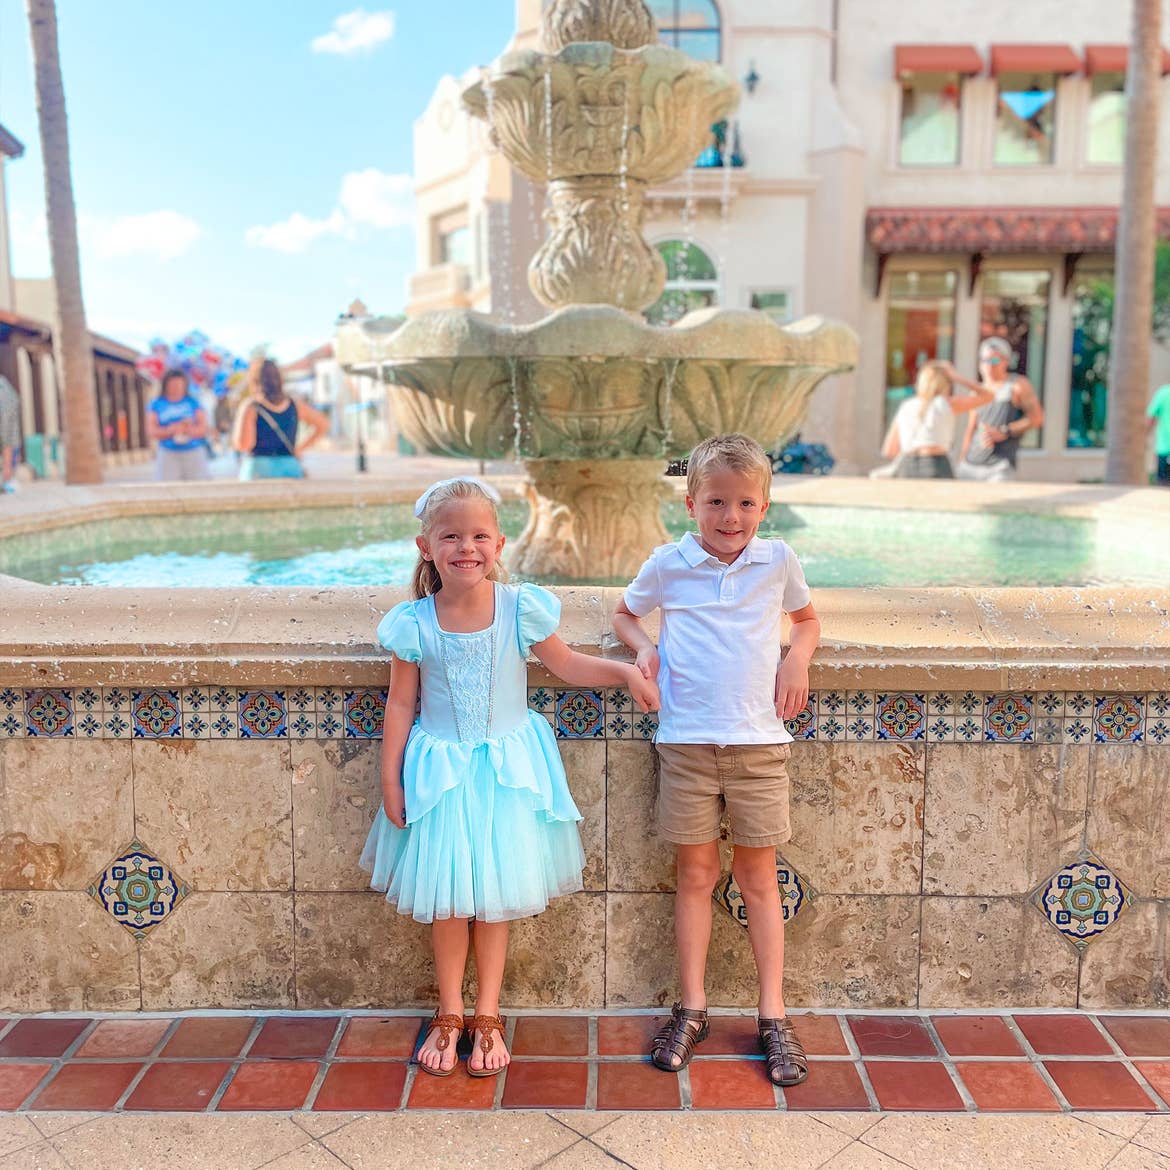 A girl wearing a blue Cinderella dress and a boy wearing a white polo and khaki shorts stand outside near a water fountain.